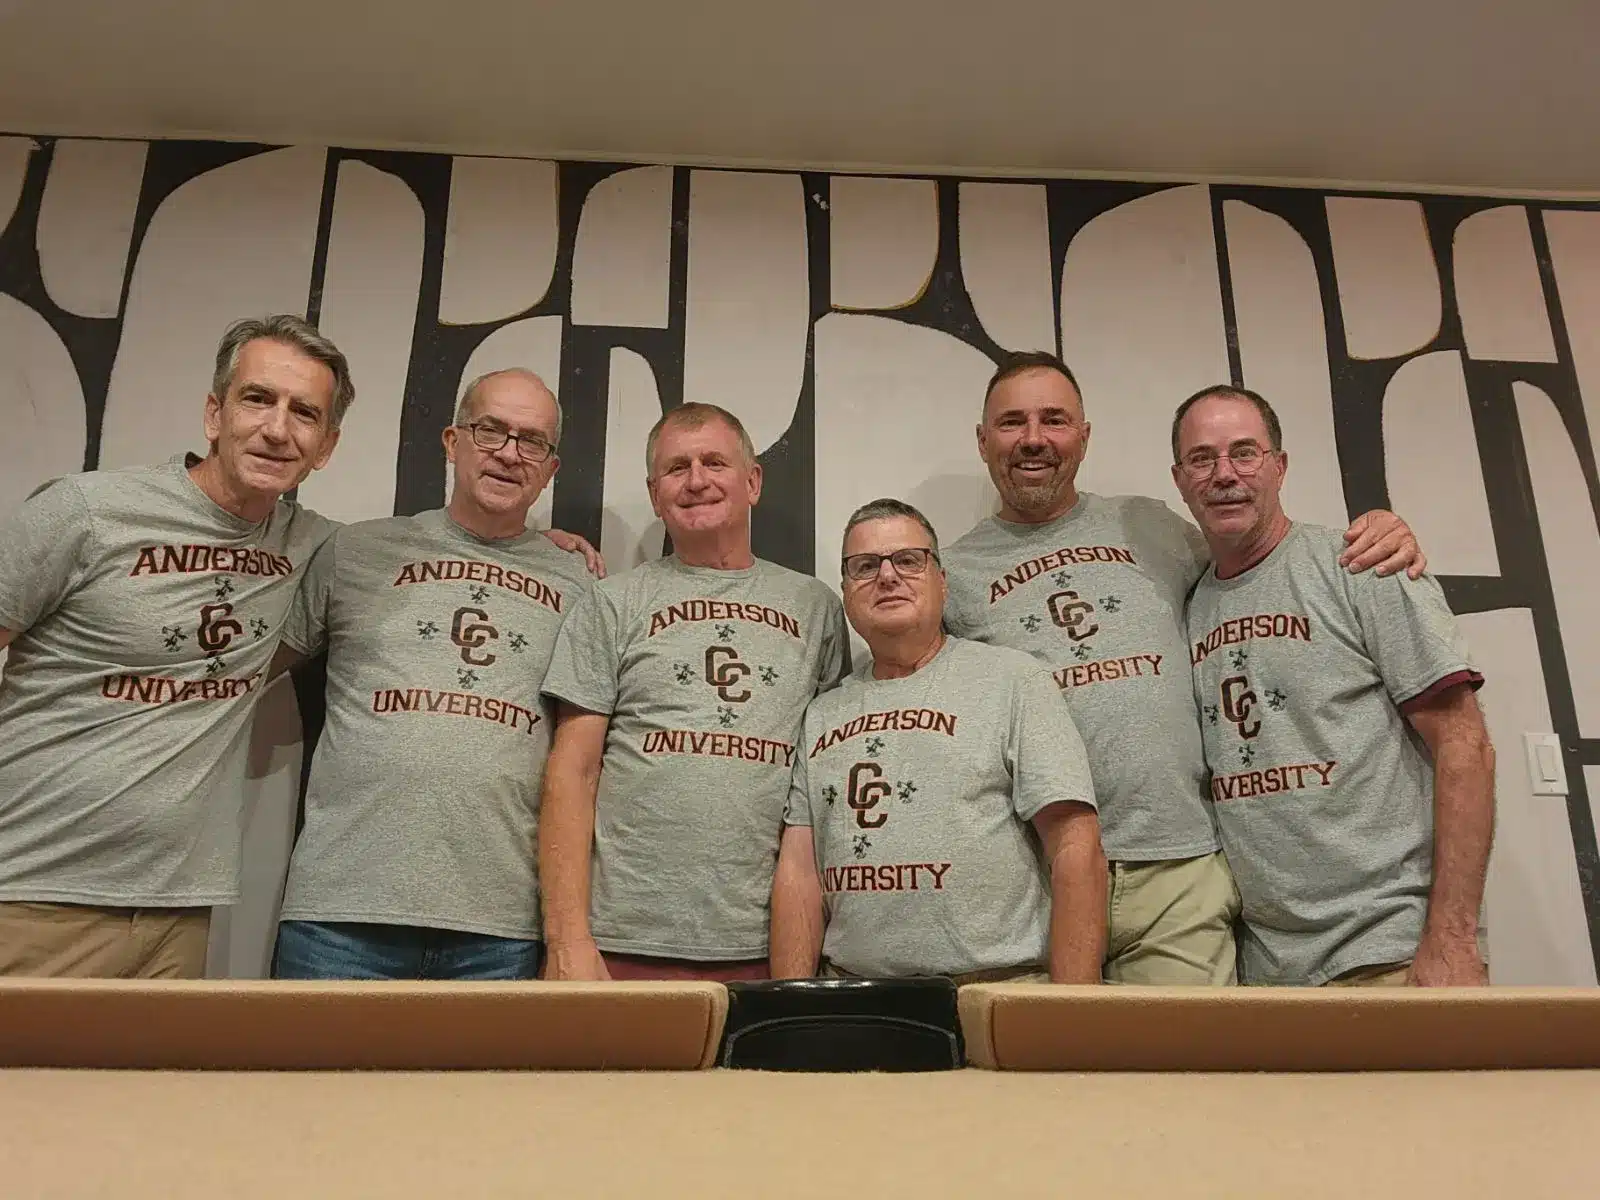 1982 Anderson cross country team at the 40th reunion